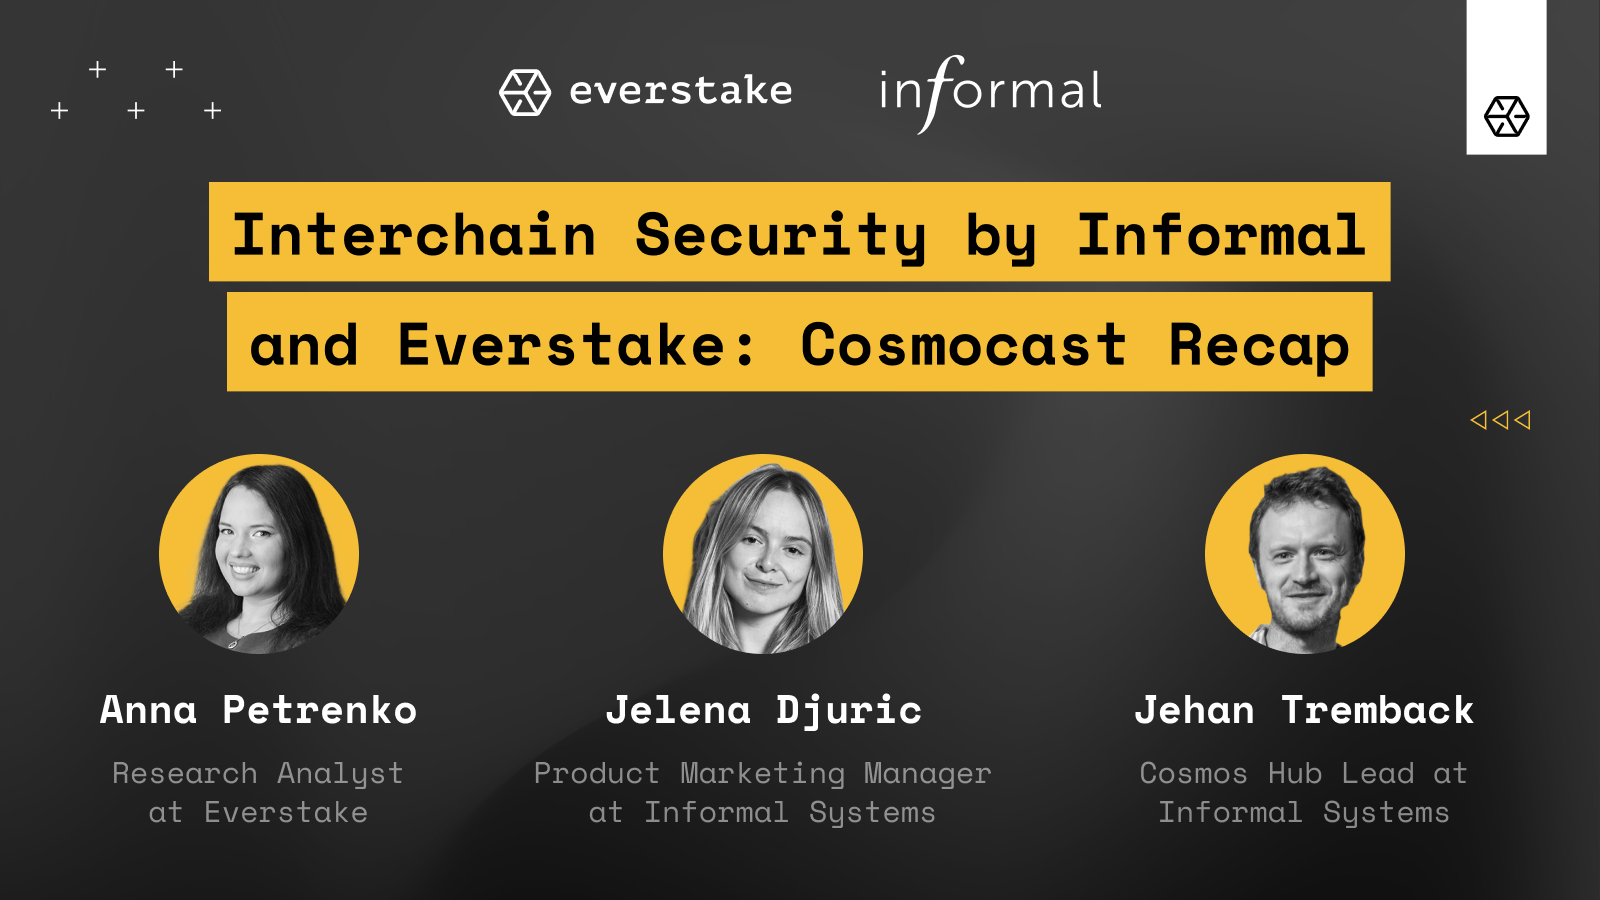 Interchain Security by Informal and Everstake: Cosmocast Recap